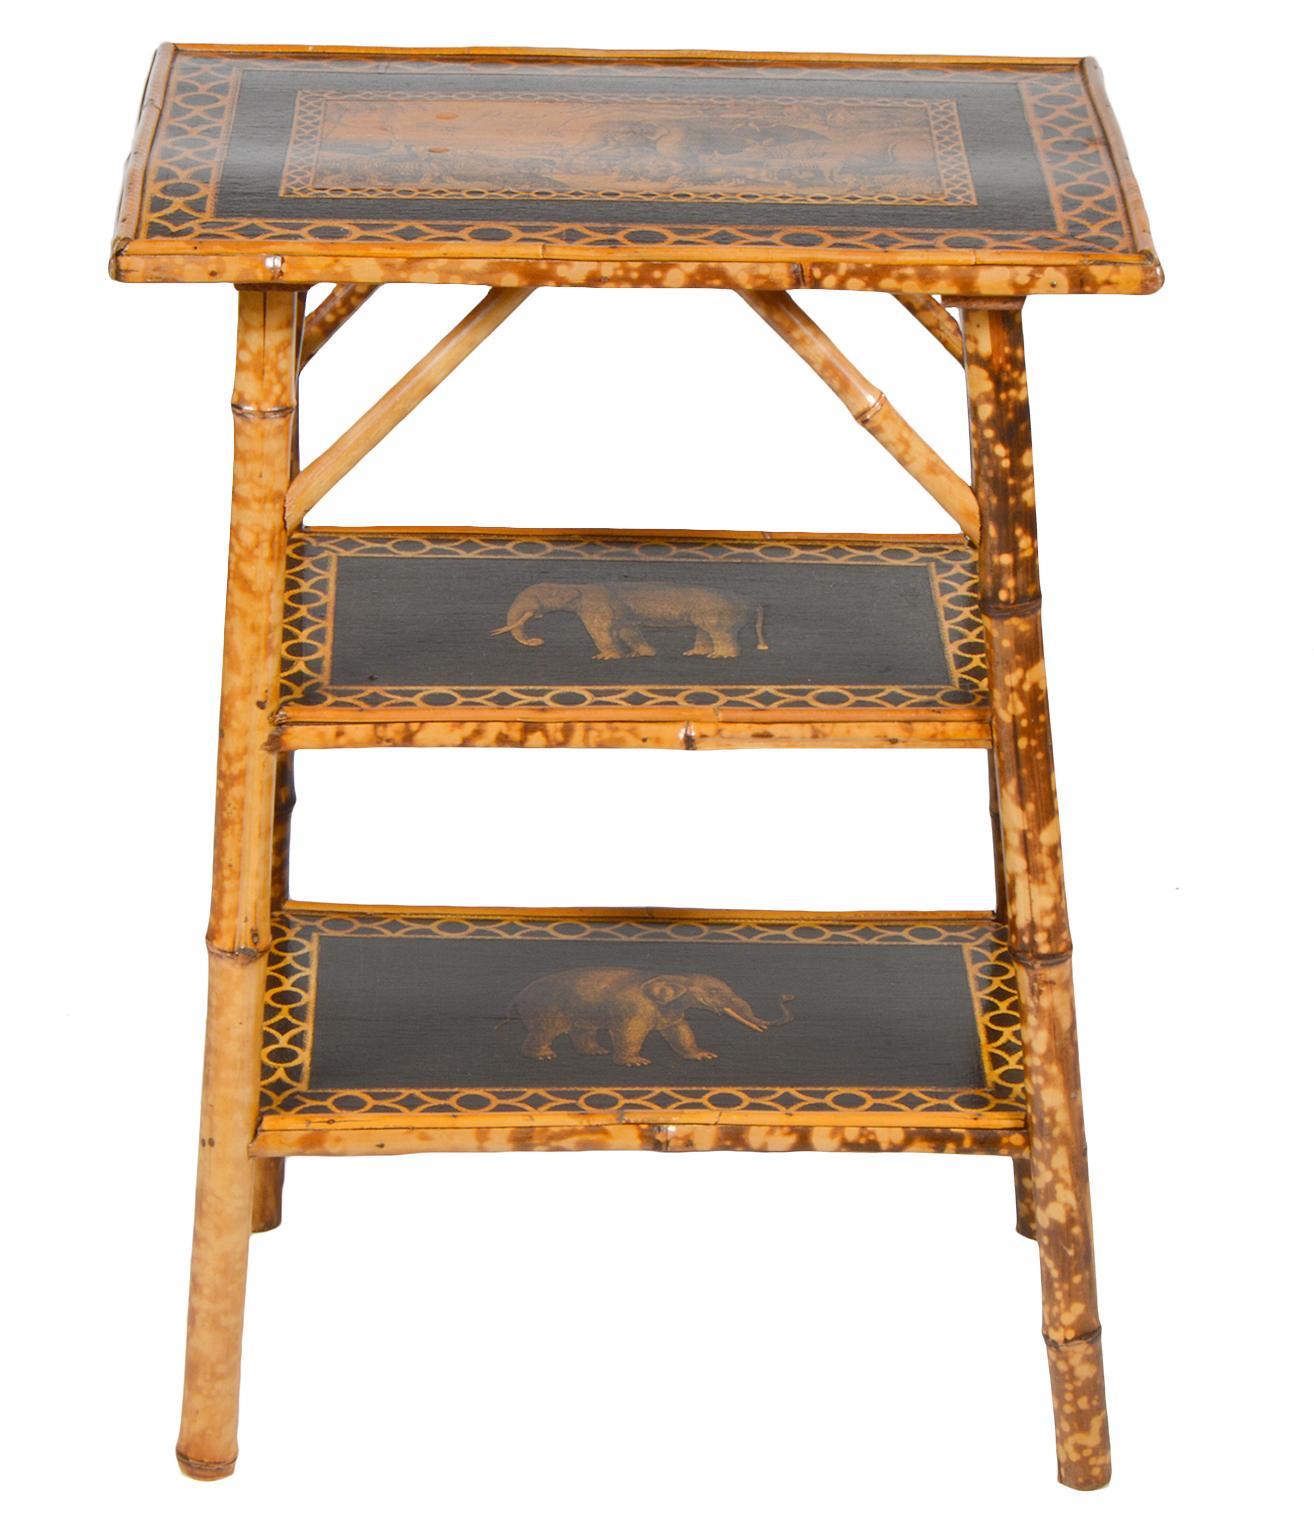 This decorative antique bamboo table features tortoise finish bamboo legs and framework. The top and shelves has later decoupage decoration, the top featuring a Noah's Ark style gathering of wild animals, the two shelves featuring single African